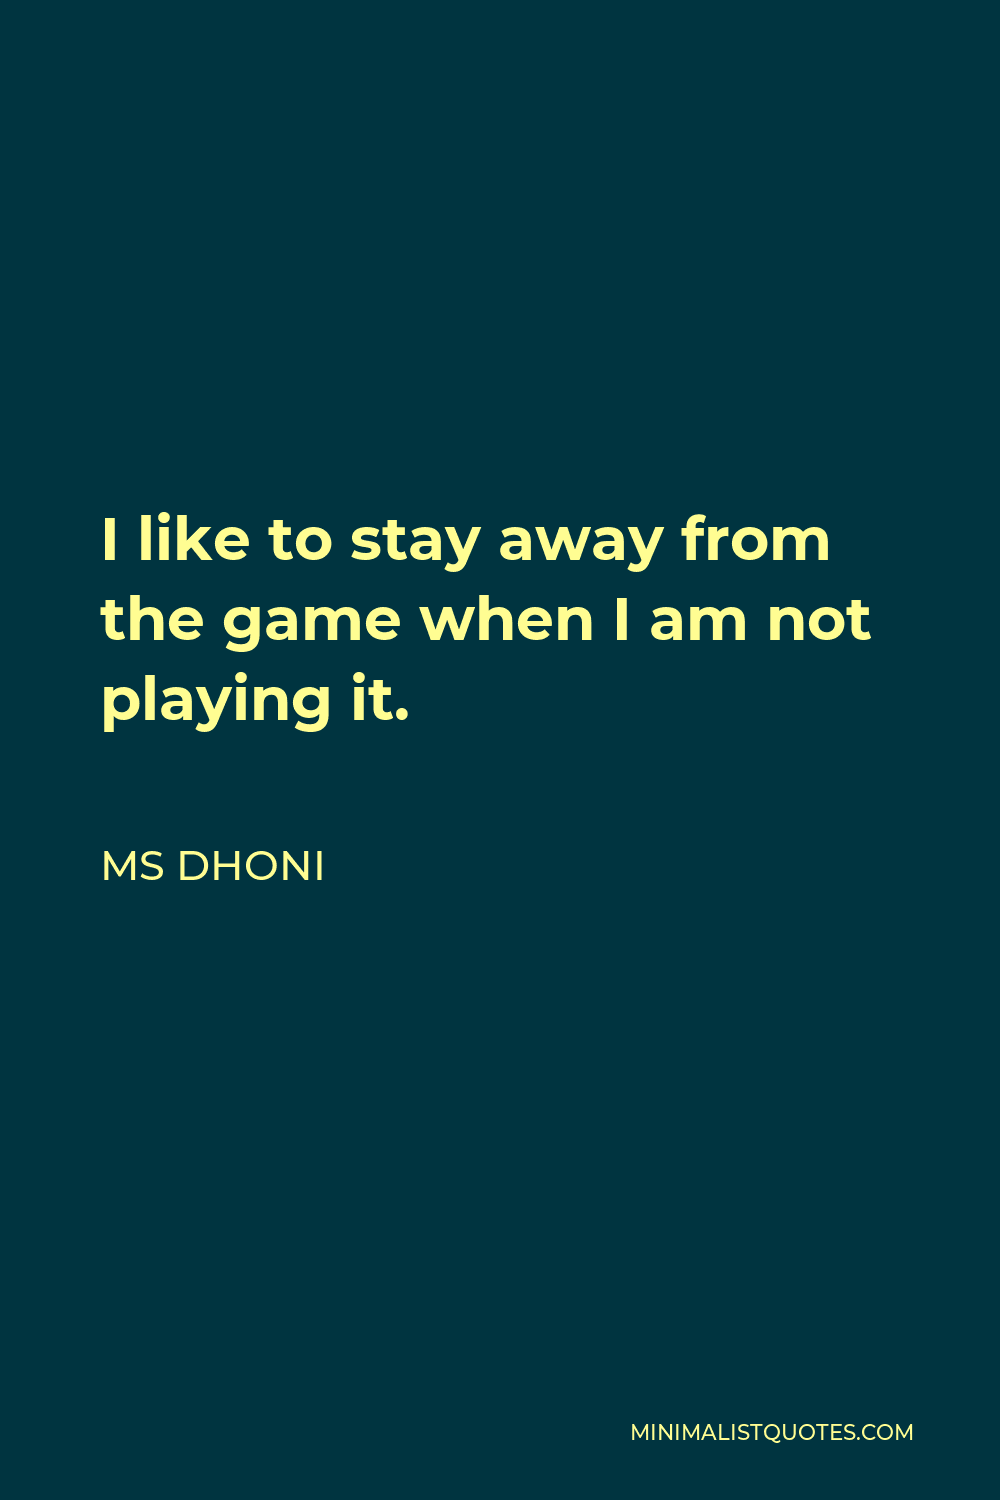 MS Dhoni Quote - I like to stay away from the game when I am not playing it.